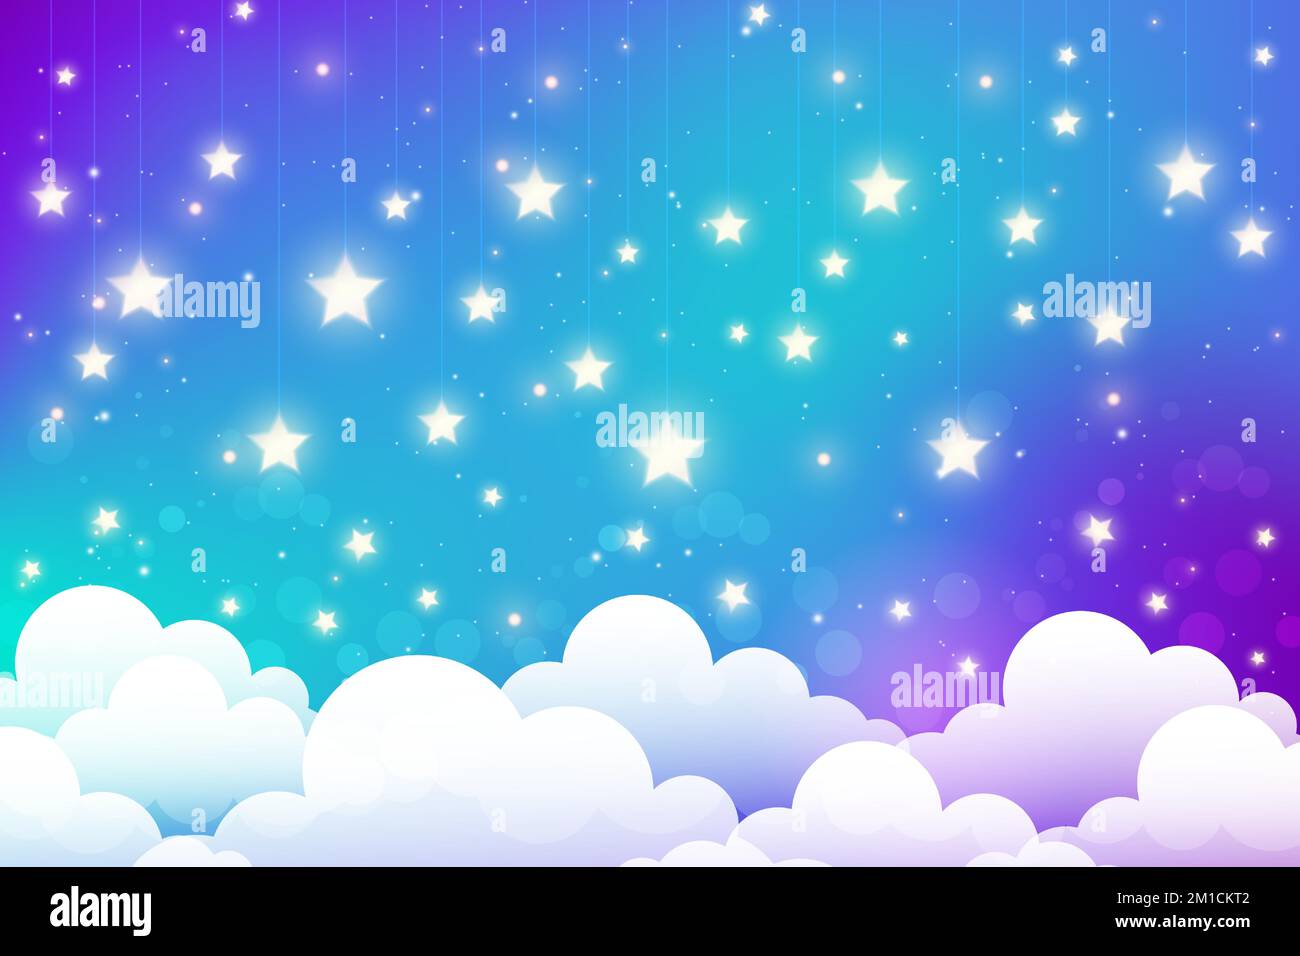 Night sky with stars and clouds. Magical landscape, abstract fabulous pattern. Cute candy wallpaper. Vector cartoon illustration. Stock Vector